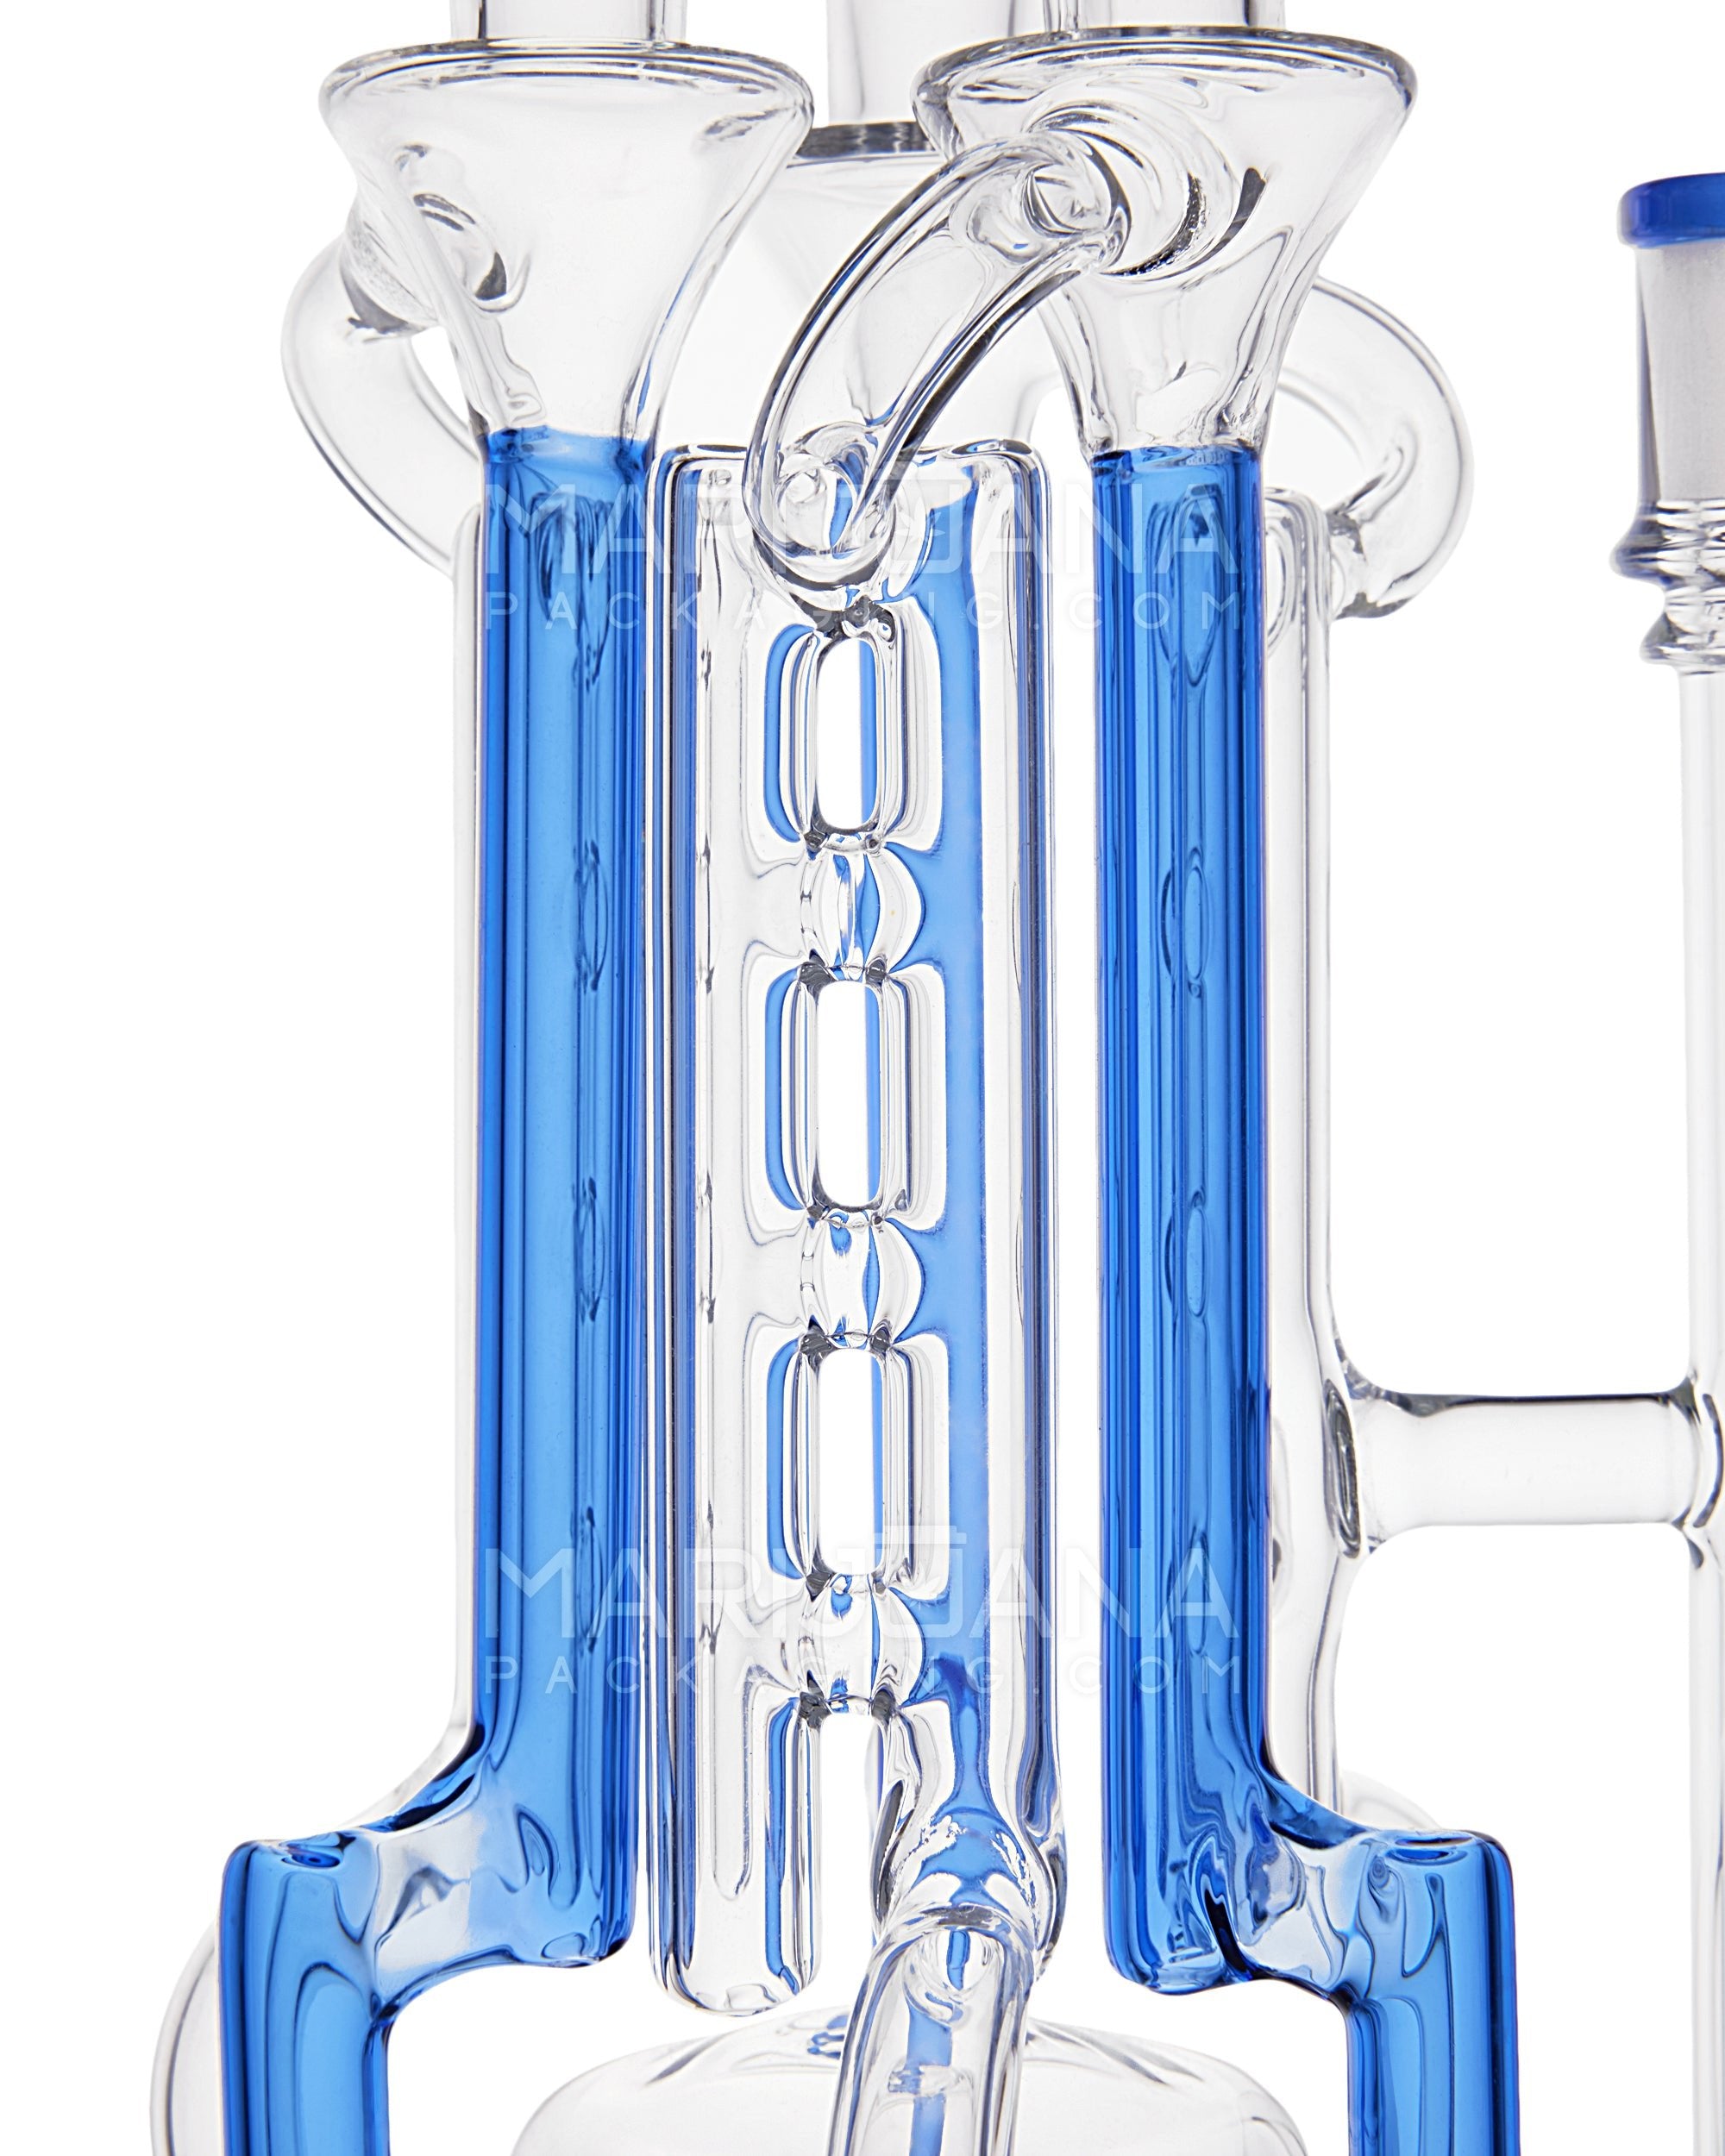 USA Glass | Bent Neck Inline Perc Six Recycler Pillar Tower Water Pipe w/ Thick Base | 14.5in Tall - 14mm Bowl - Blue - 4